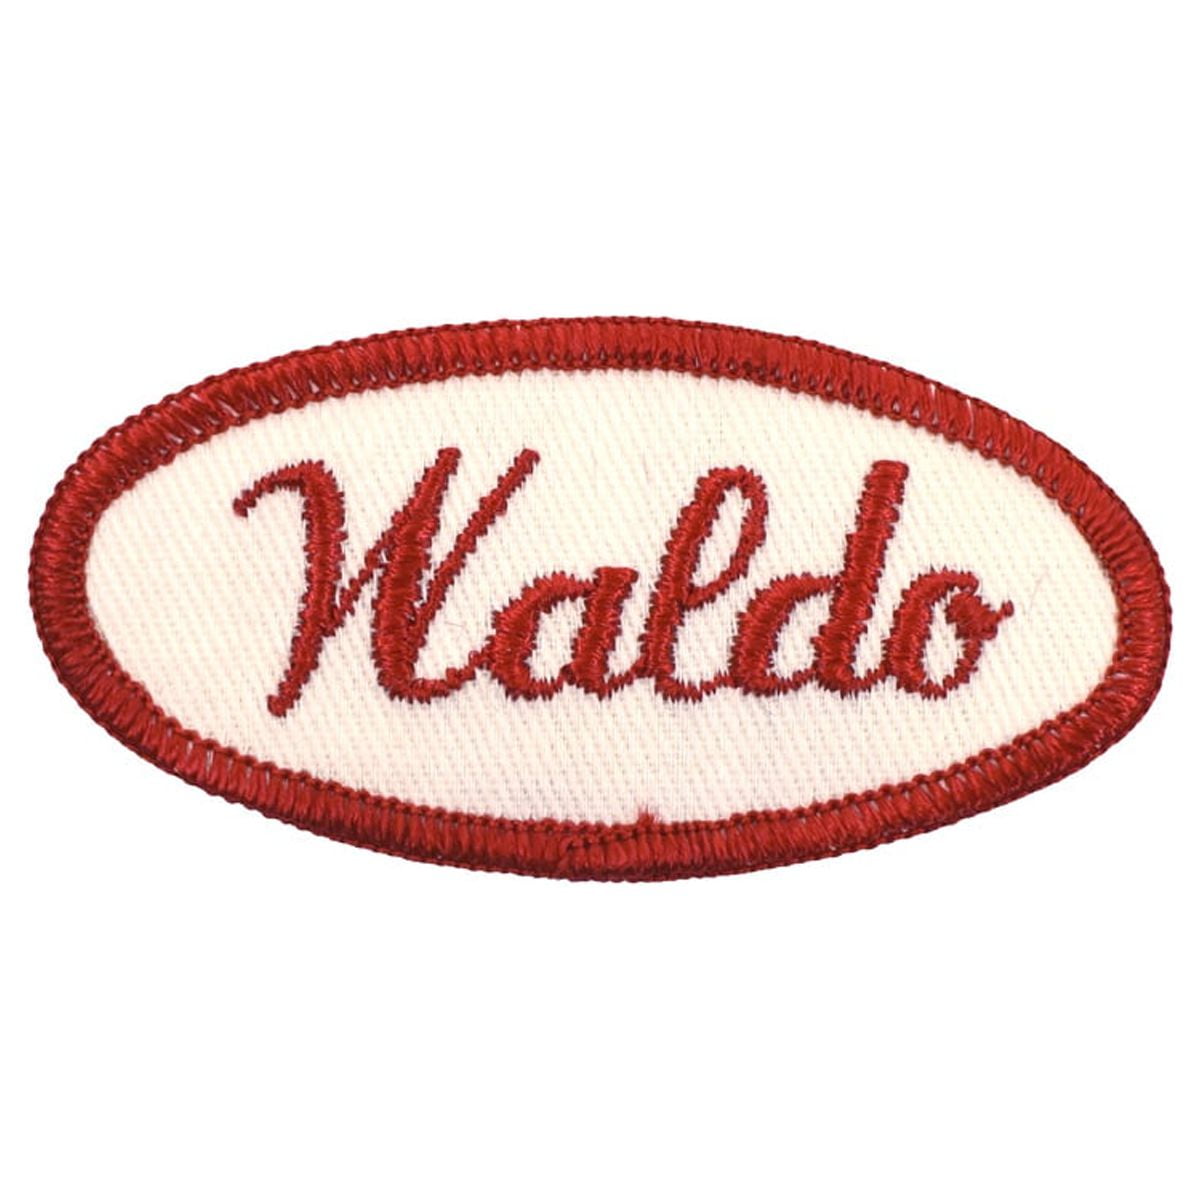 Waldo Shop Mechanic Shirt Patch Embroidered Sew Iron On Applique Name Tag  Uniform Clothing Accessory